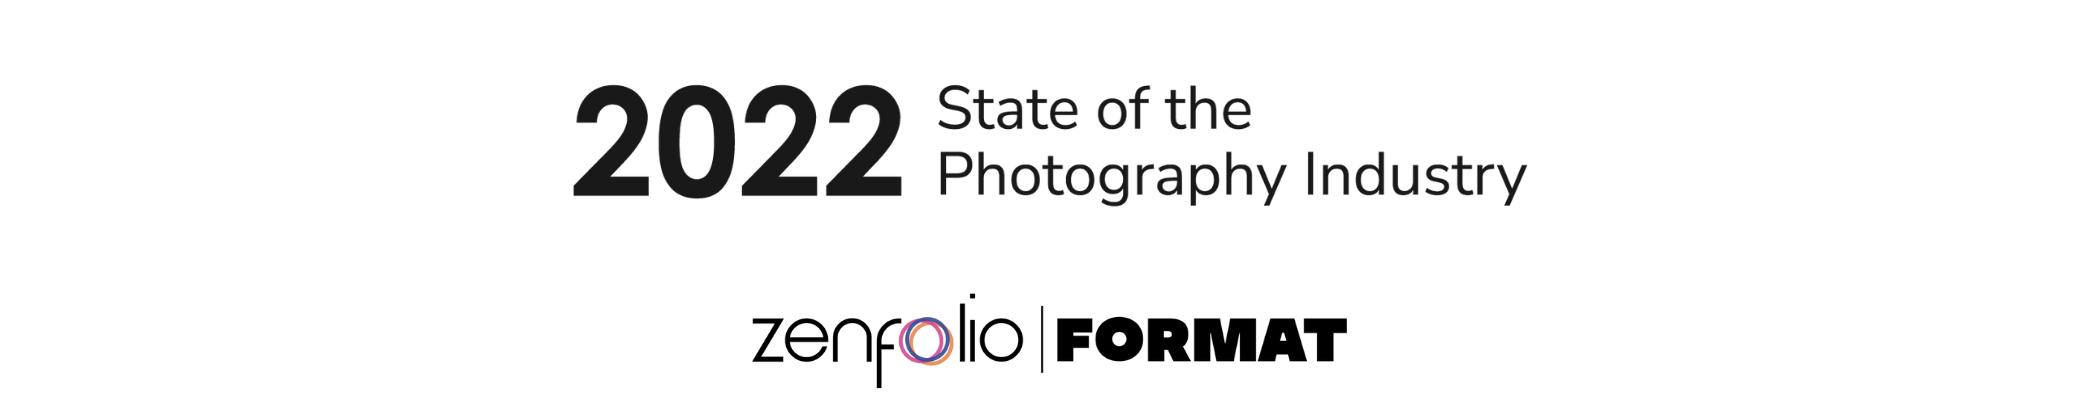 The 2022 State of the Photography Industry